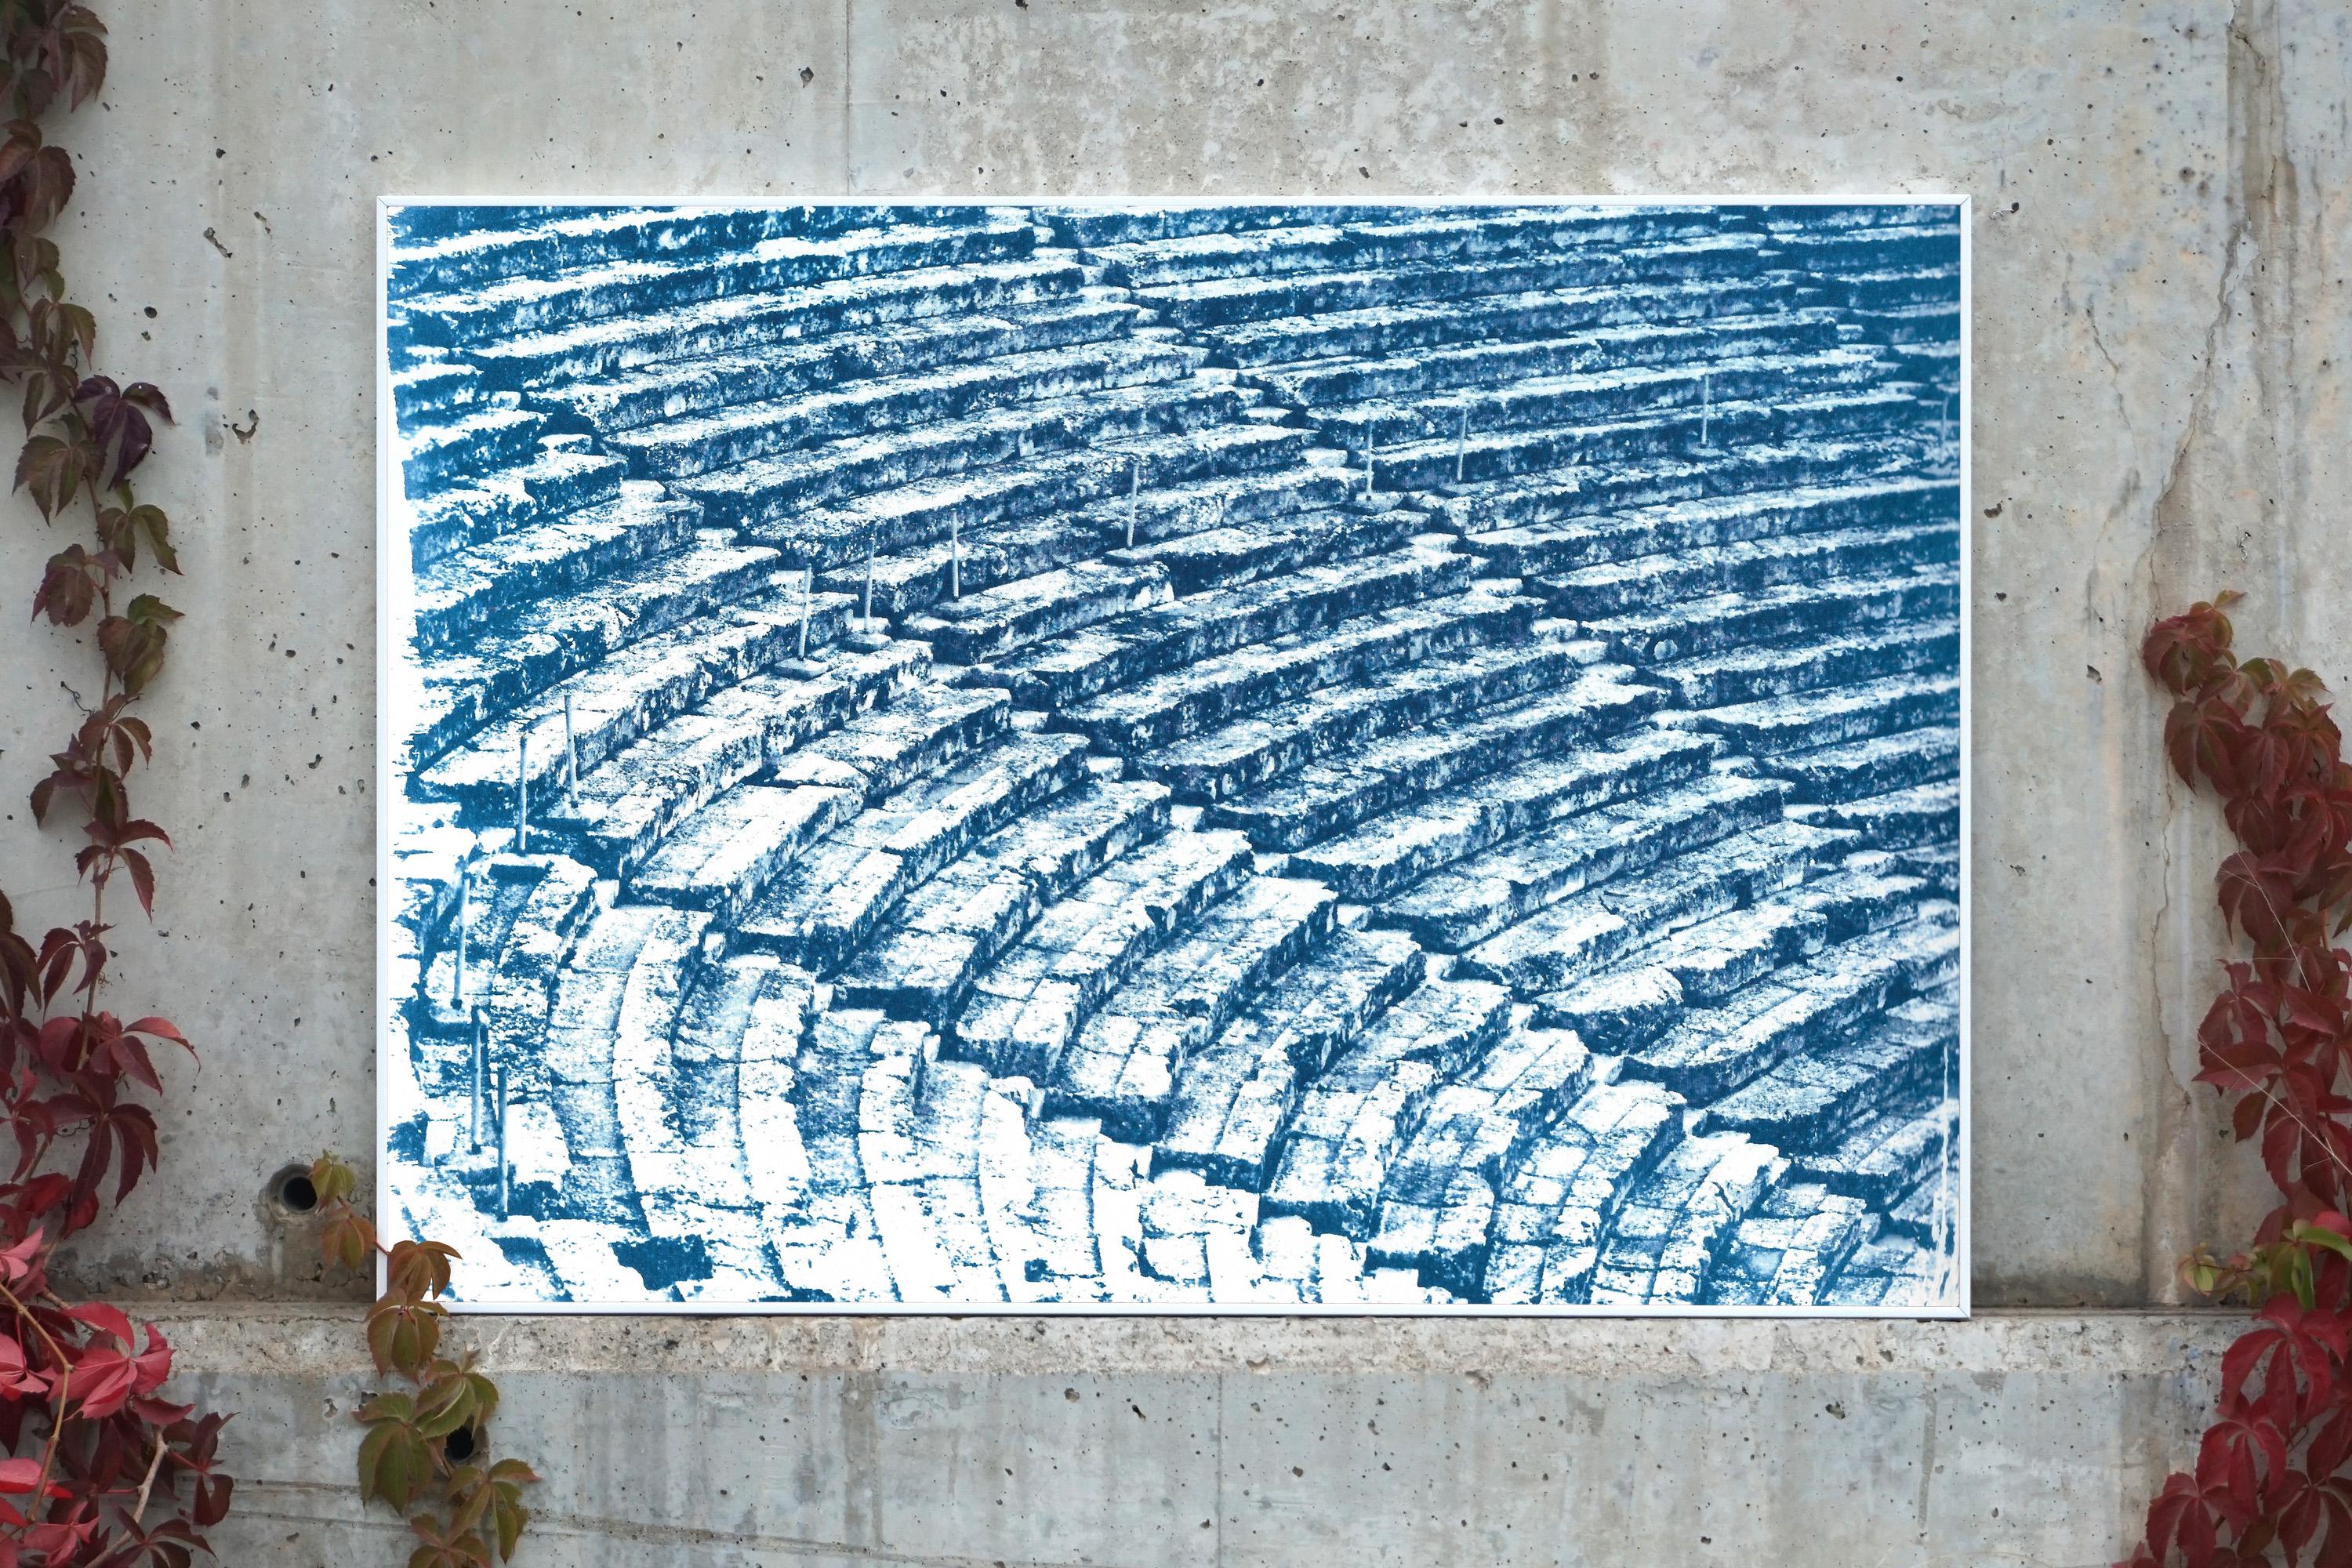 Diptych of Ancient Theaters, 200cmx70cm Cyanotypes, Greek and Roman Architecture - Modern Print by Kind of Cyan